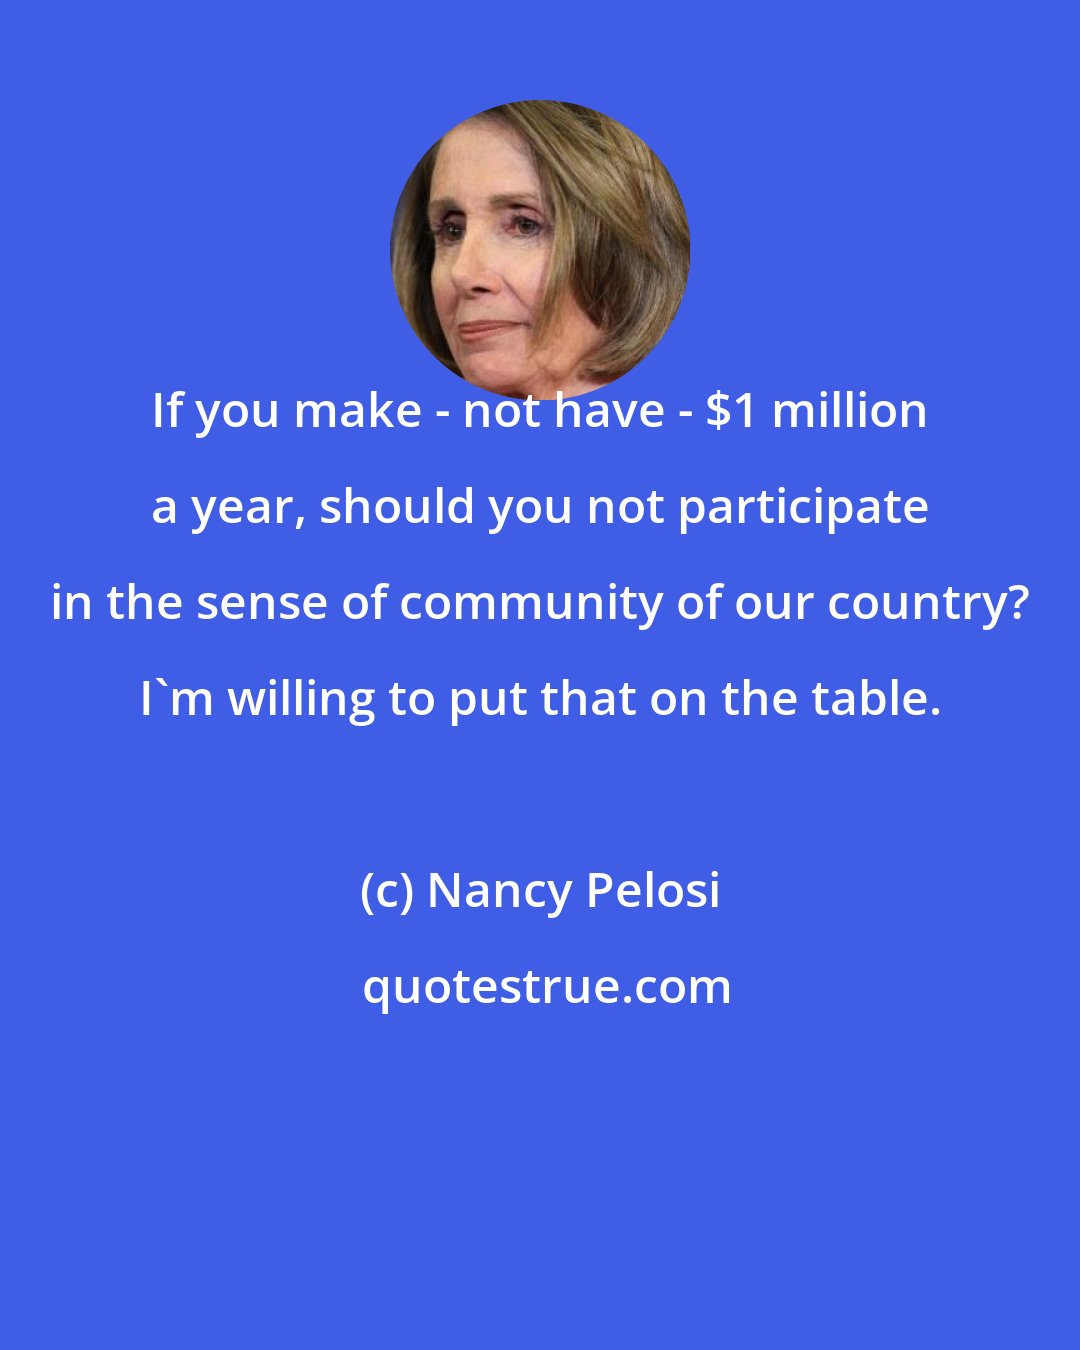 Nancy Pelosi: If you make - not have - $1 million a year, should you not participate in the sense of community of our country? I'm willing to put that on the table.